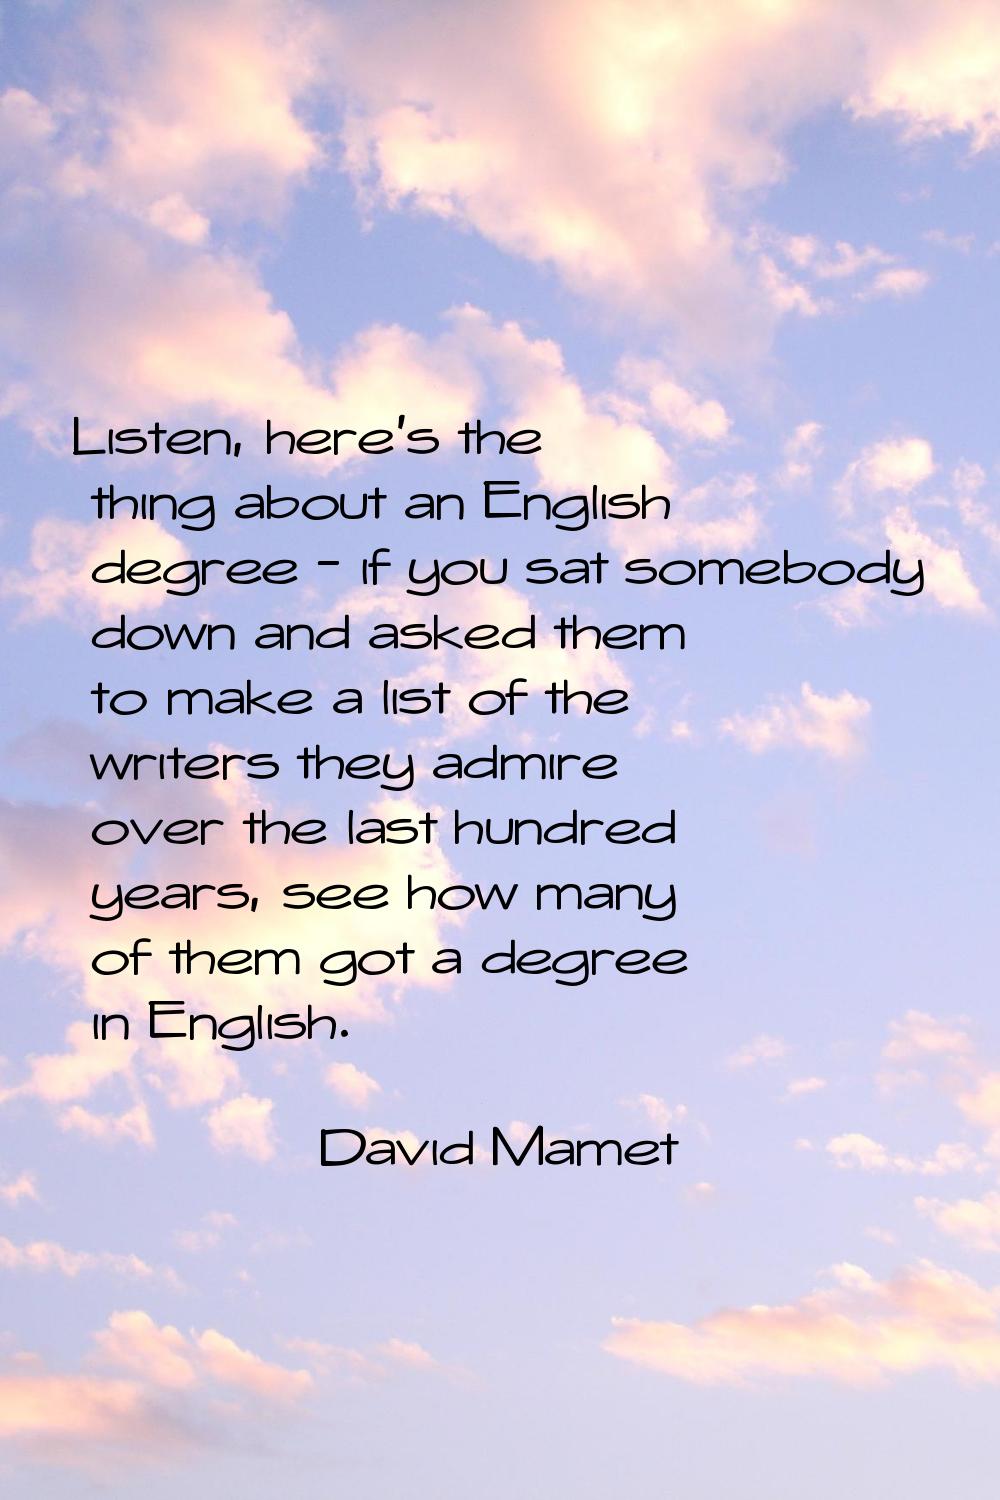 Listen, here's the thing about an English degree - if you sat somebody down and asked them to make 